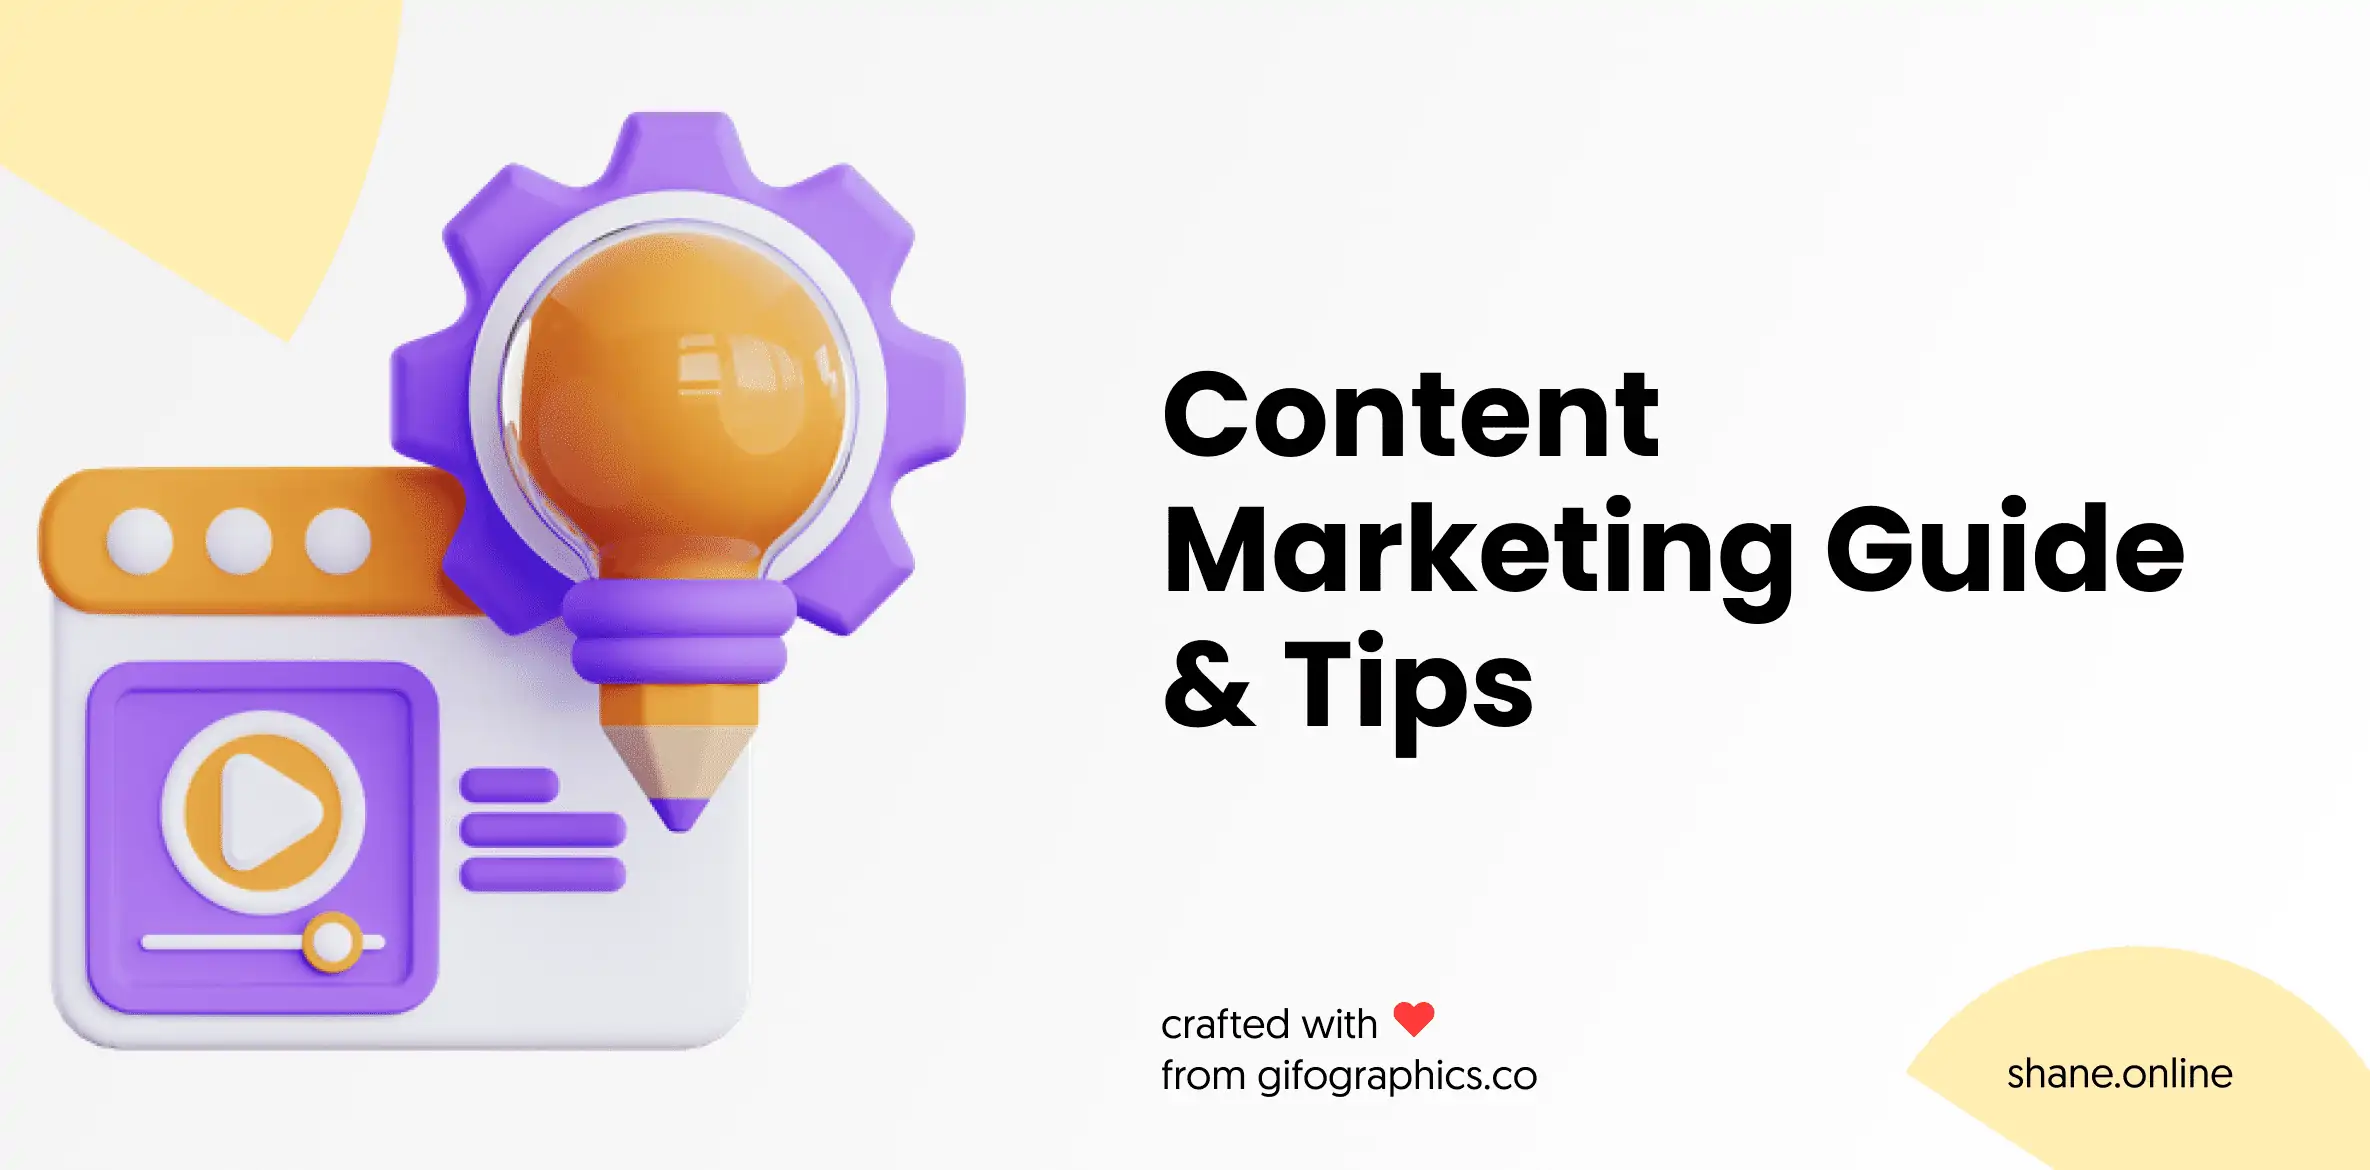 Content Marketing Guide & Tips